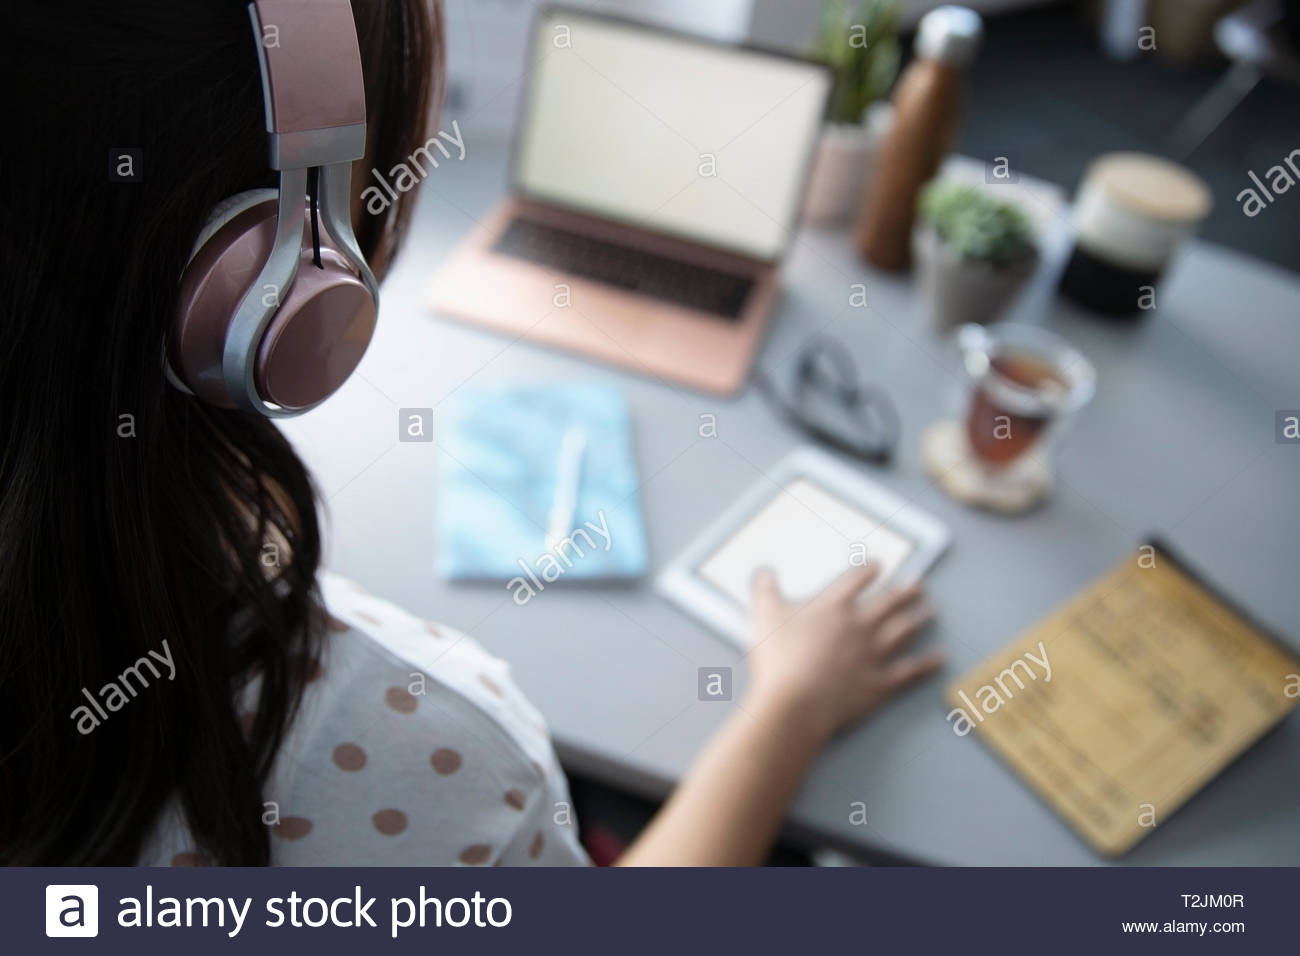 Businesswoman with headphones using digital tablet at desk Stock Photo